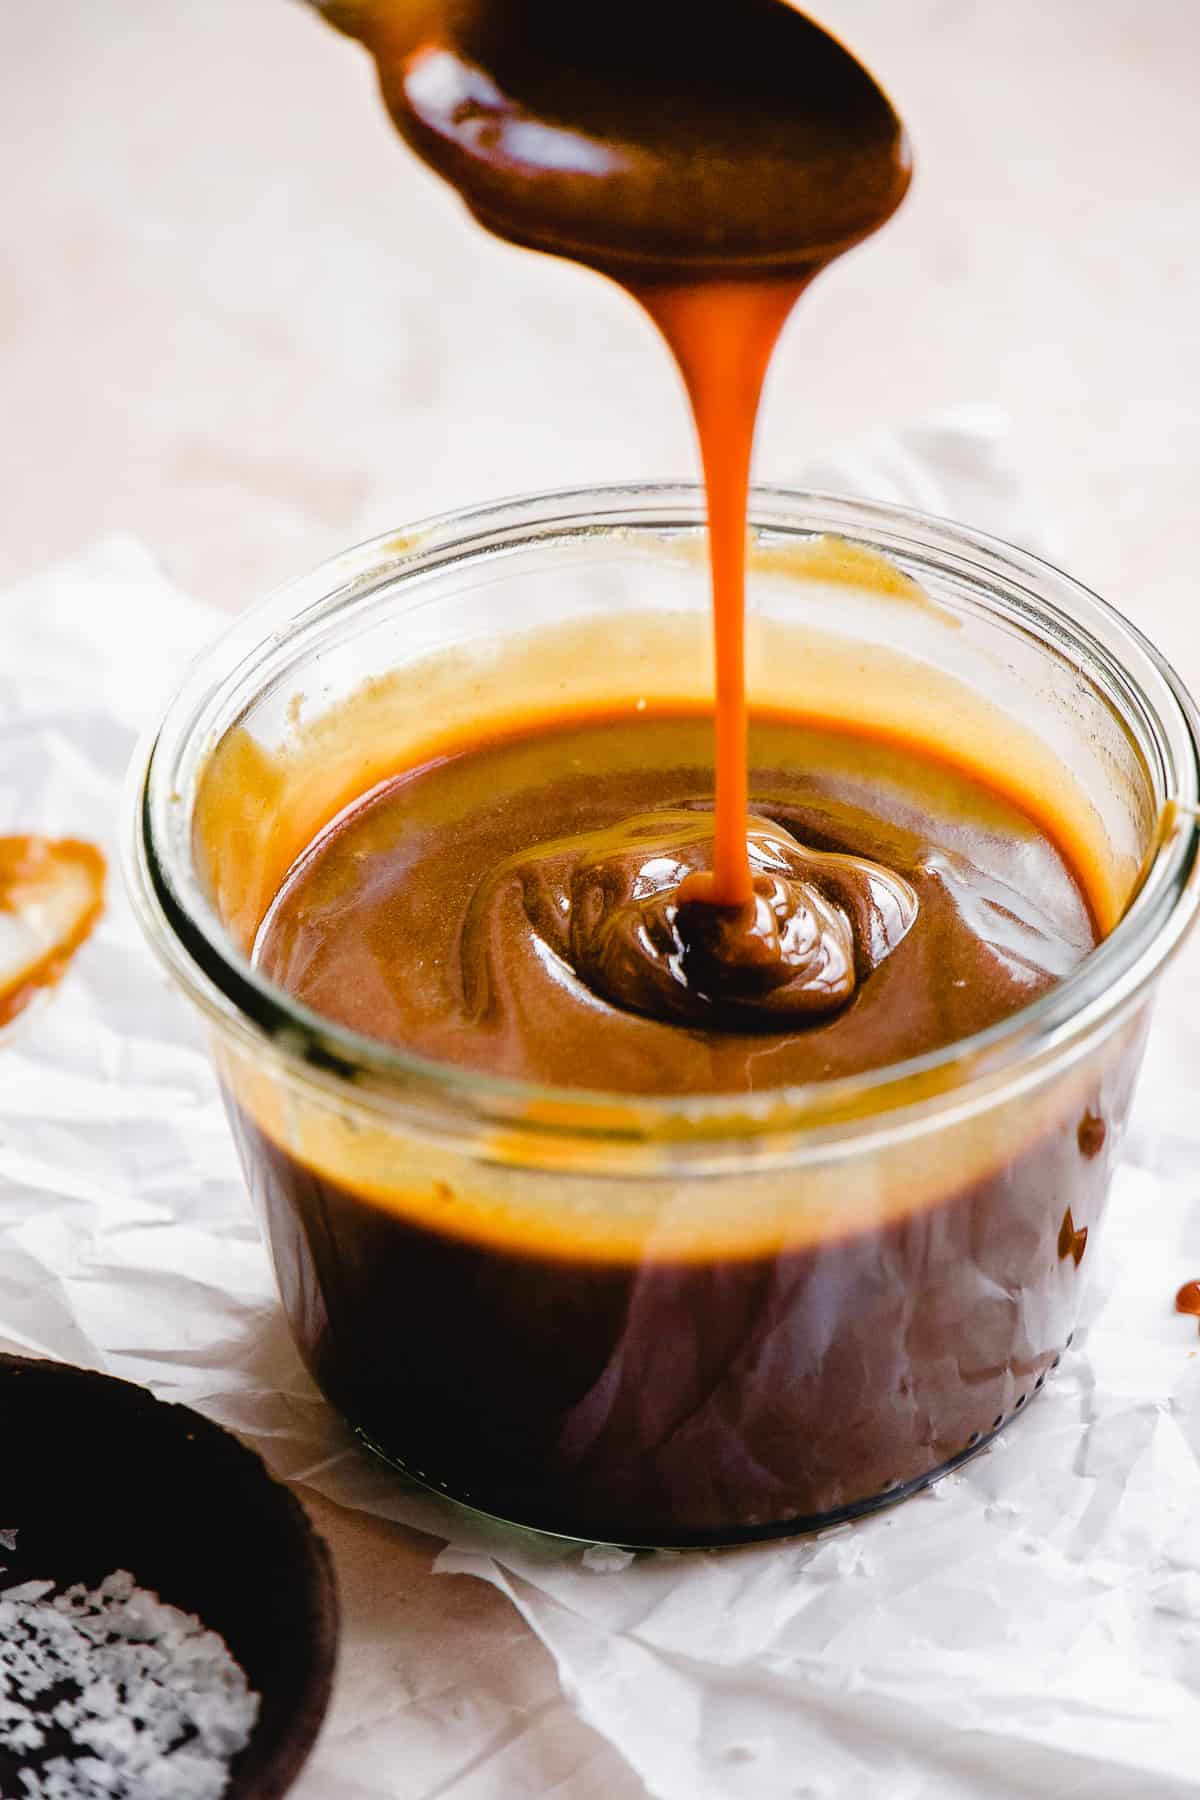 Dairy free caramel sauce dripping off a spoon into a jar.